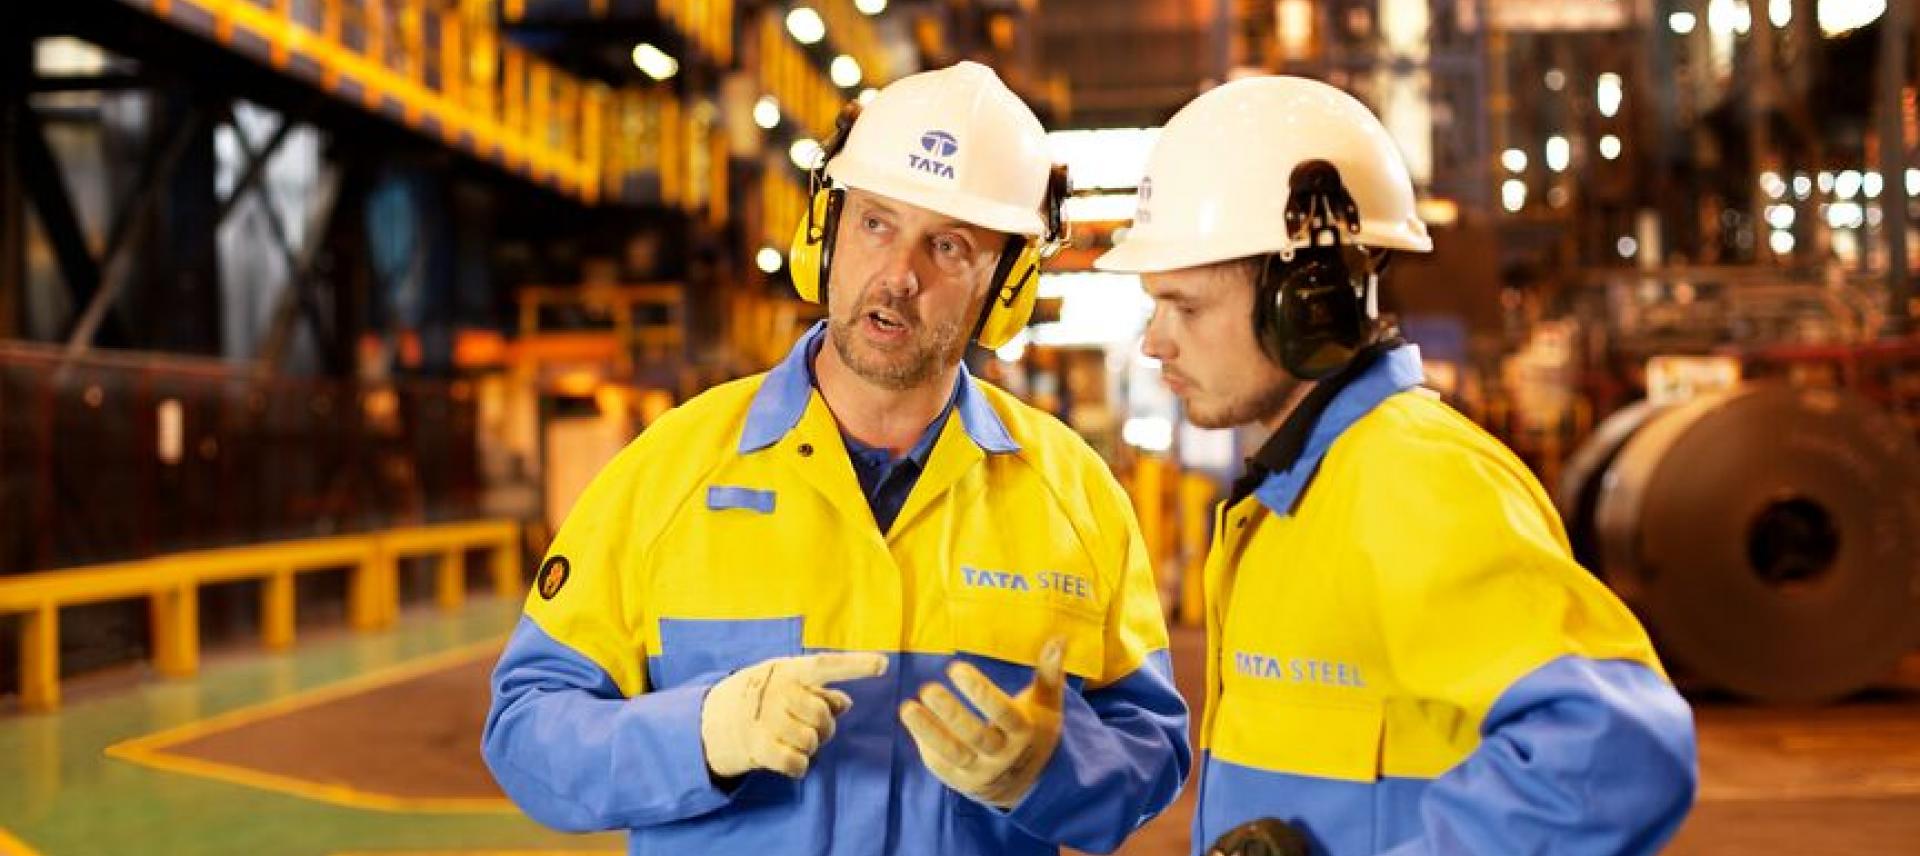 Tata Steel workers in a manufacturing environment, wearing protective equipment, having a discussion